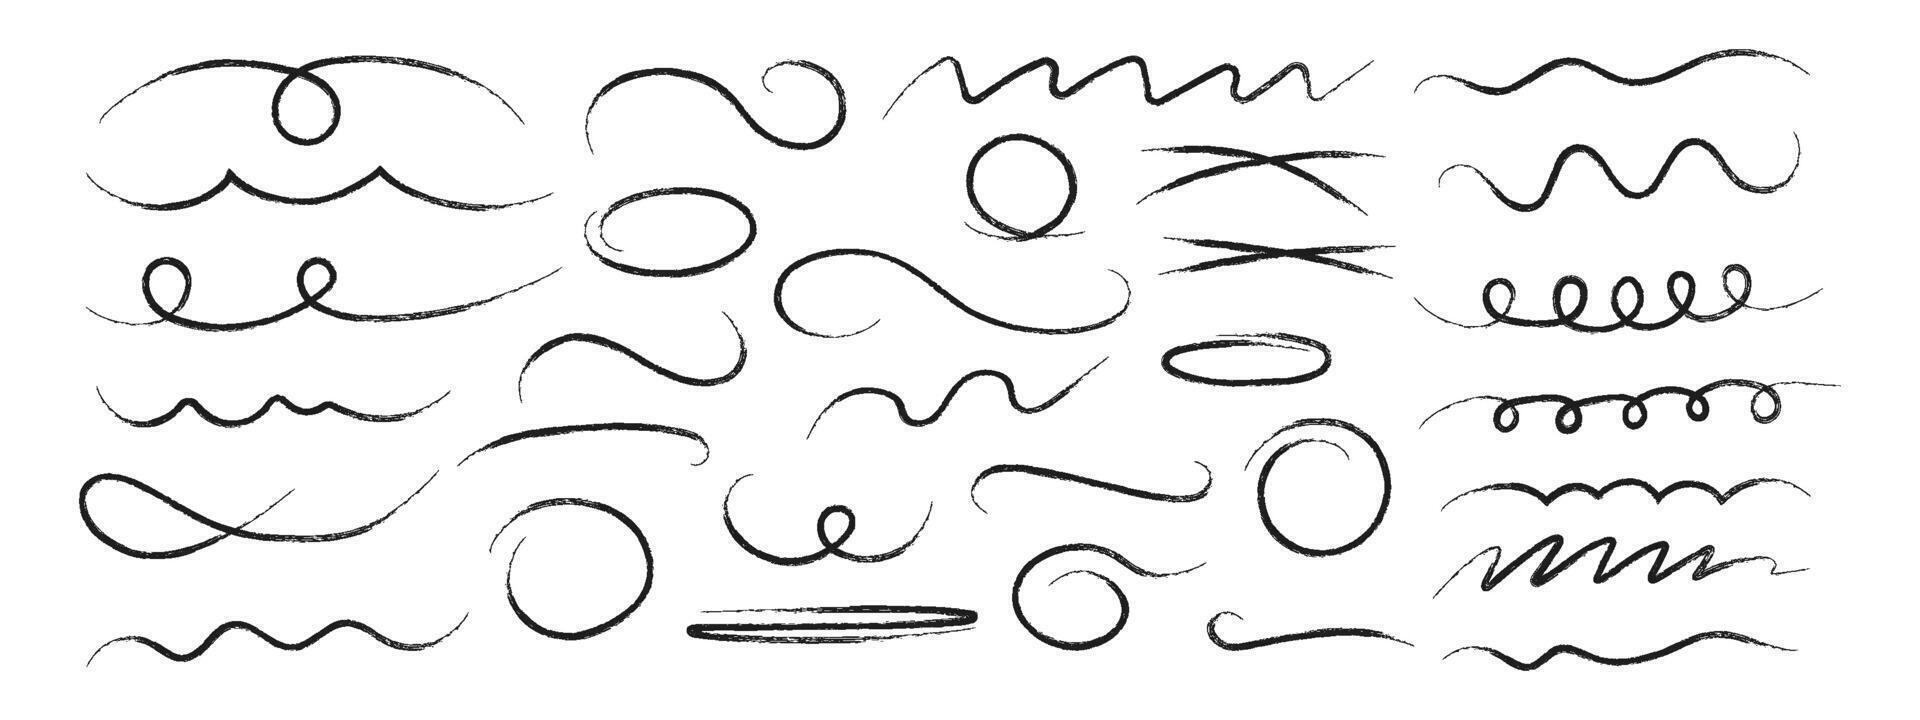 Hand drawn wavy, crossed out lines, circles and ovals. Decorative vector graphic elements. Black brush and pencil strokes. Scribbles with brush strokes